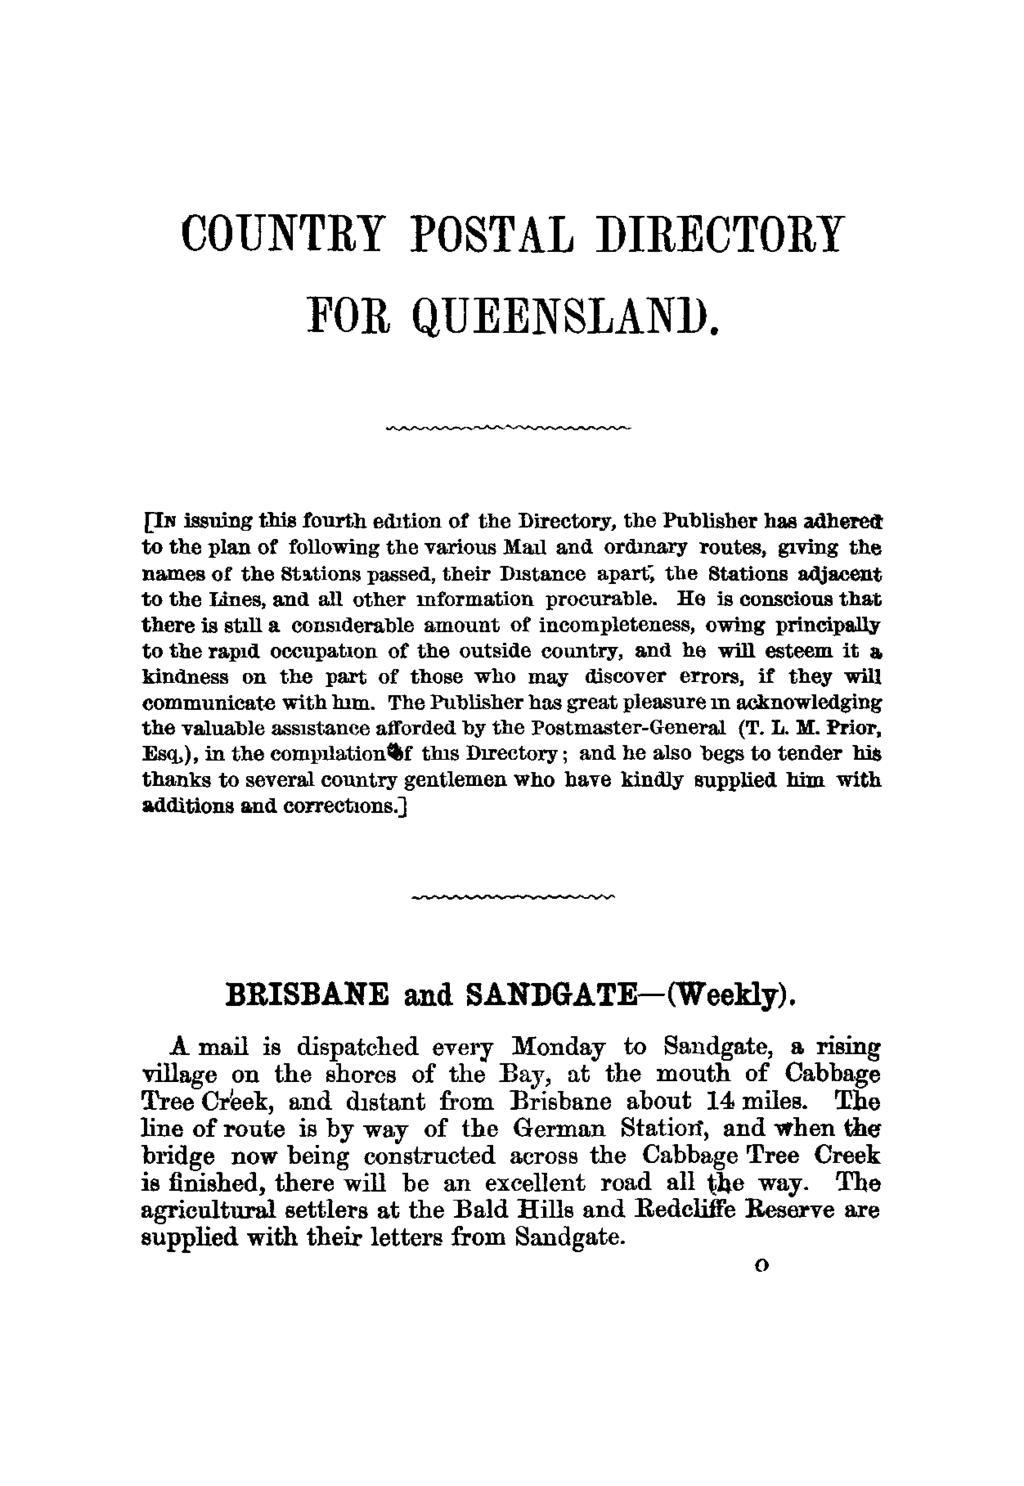 COUNTRY POSTAL DIRECTORY FOR QUEENSLAND.